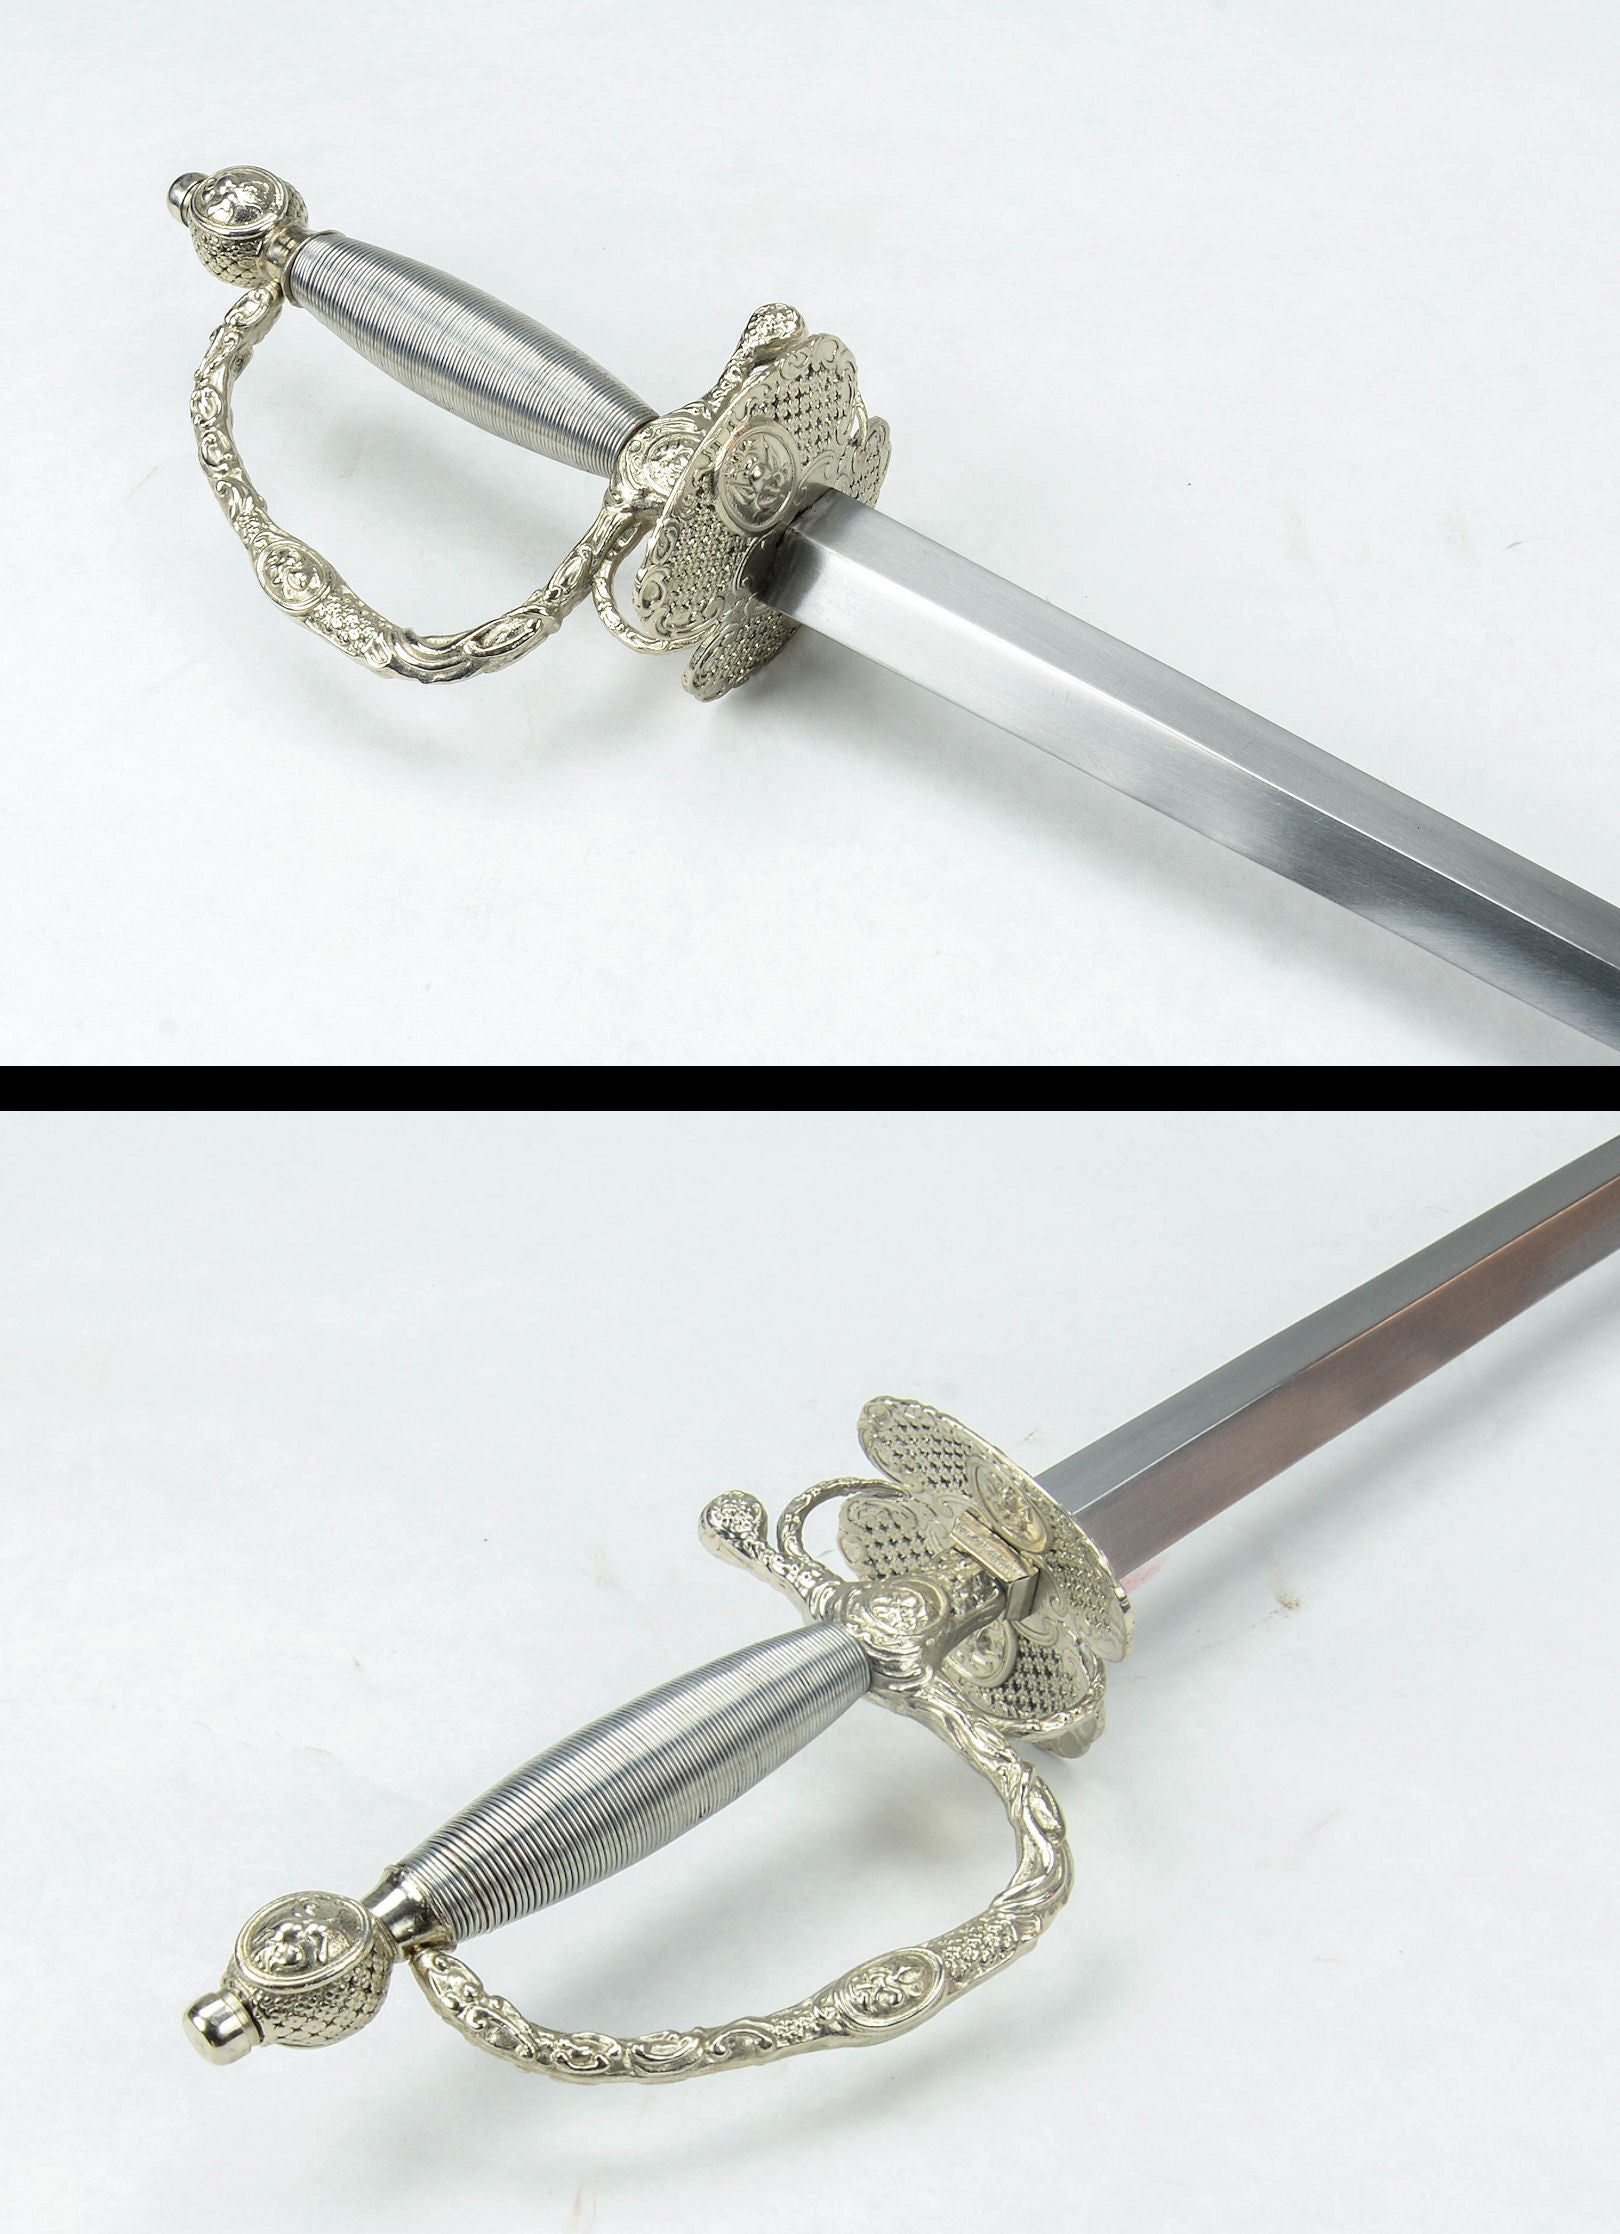 French Court Smallsword